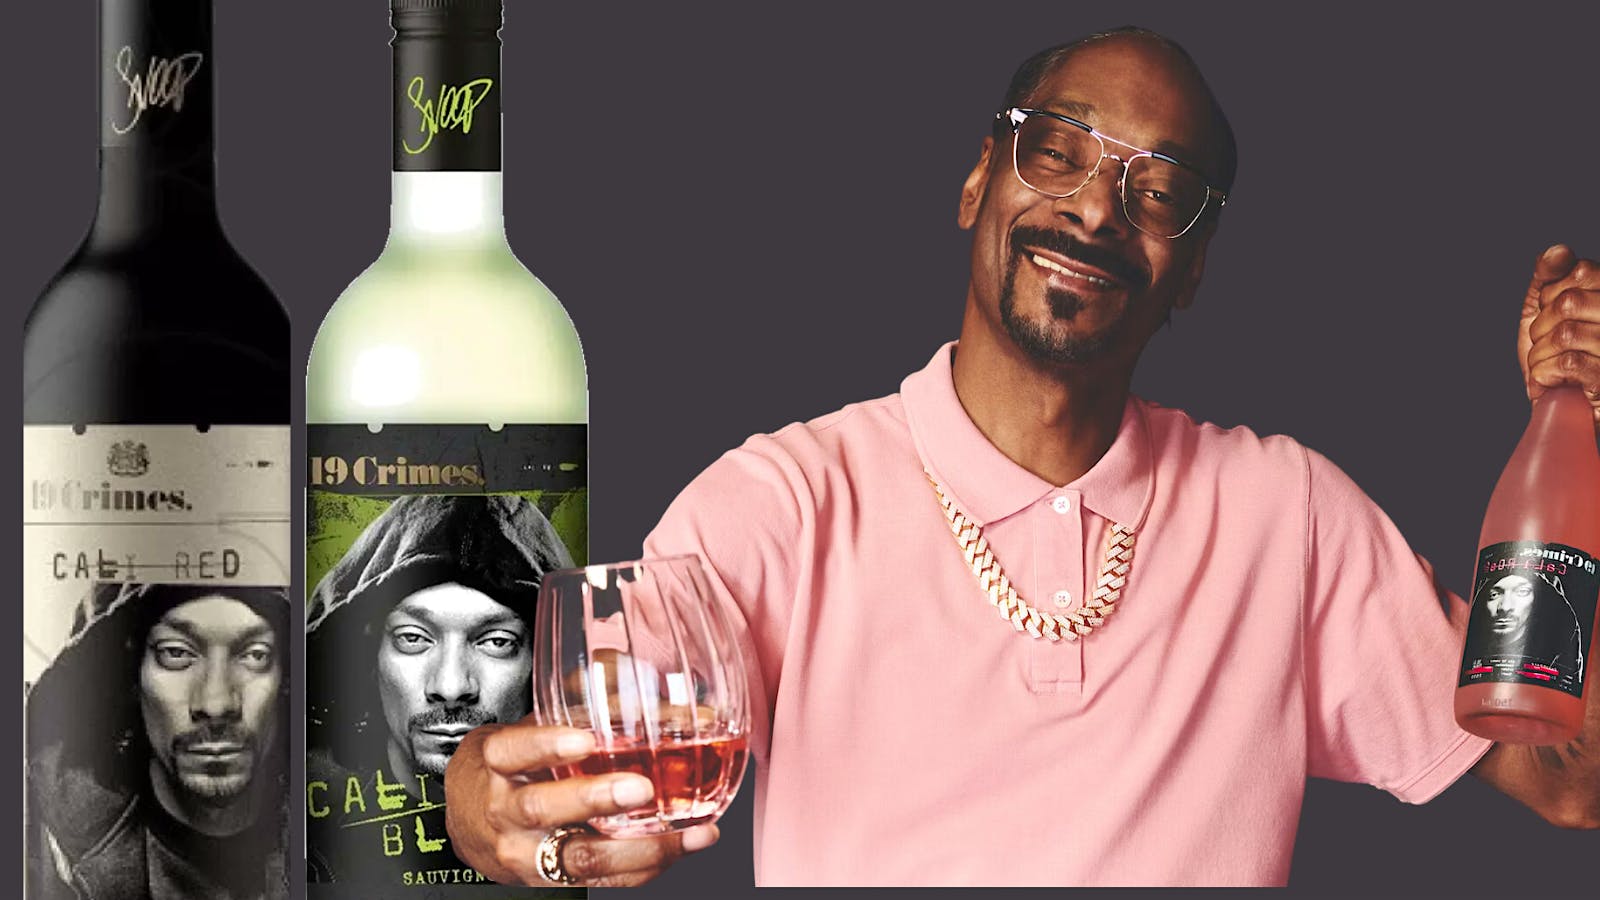 Snoop Dogg, wearing a pink shirt, holds a glass and bottle of 19 Crimes Cali Rosé, while posed next to bottles of his Cali Red and Cali Blanc